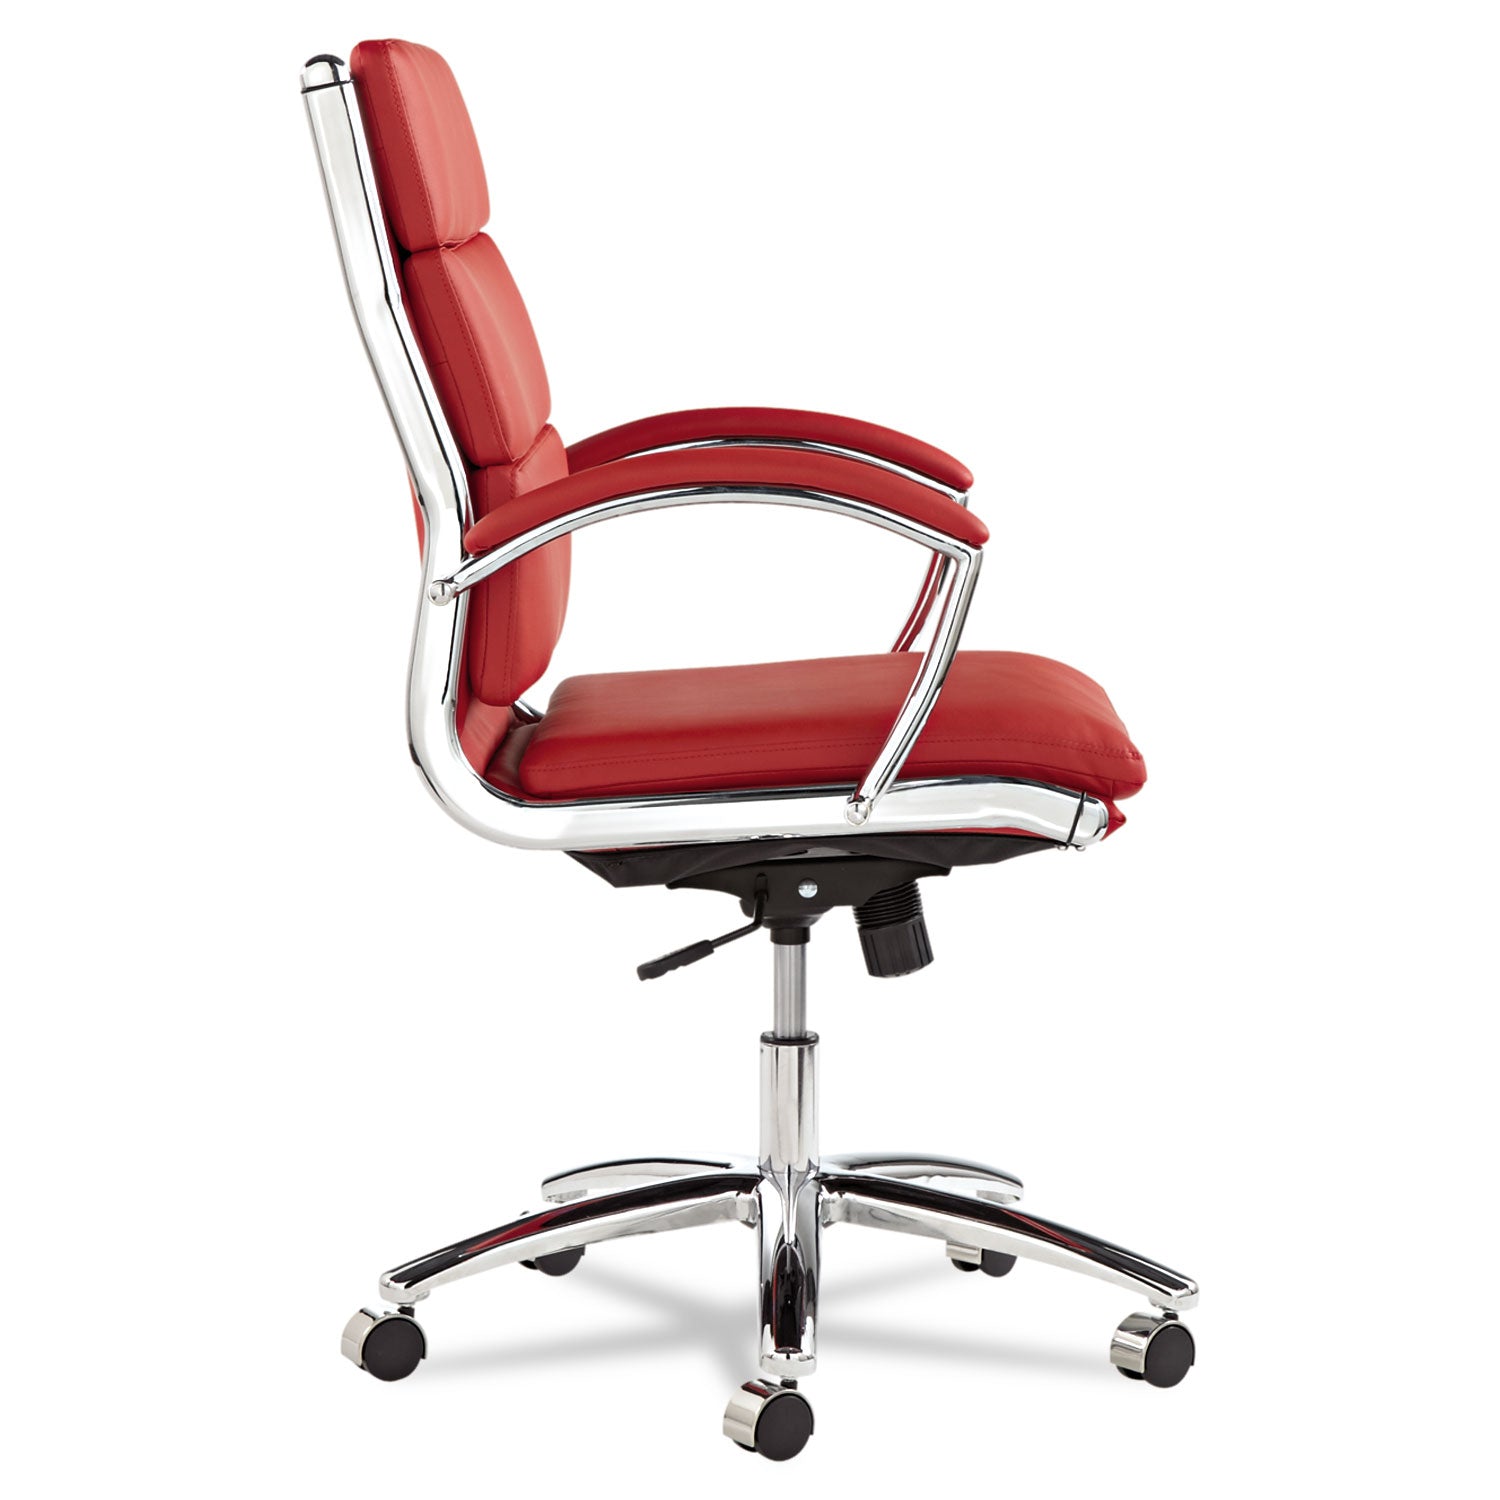 Alera Neratoli Mid-Back Slim Profile Chair, Faux Leather, Supports Up to 275 lb, Red Seat/Back, Chrome Base - 